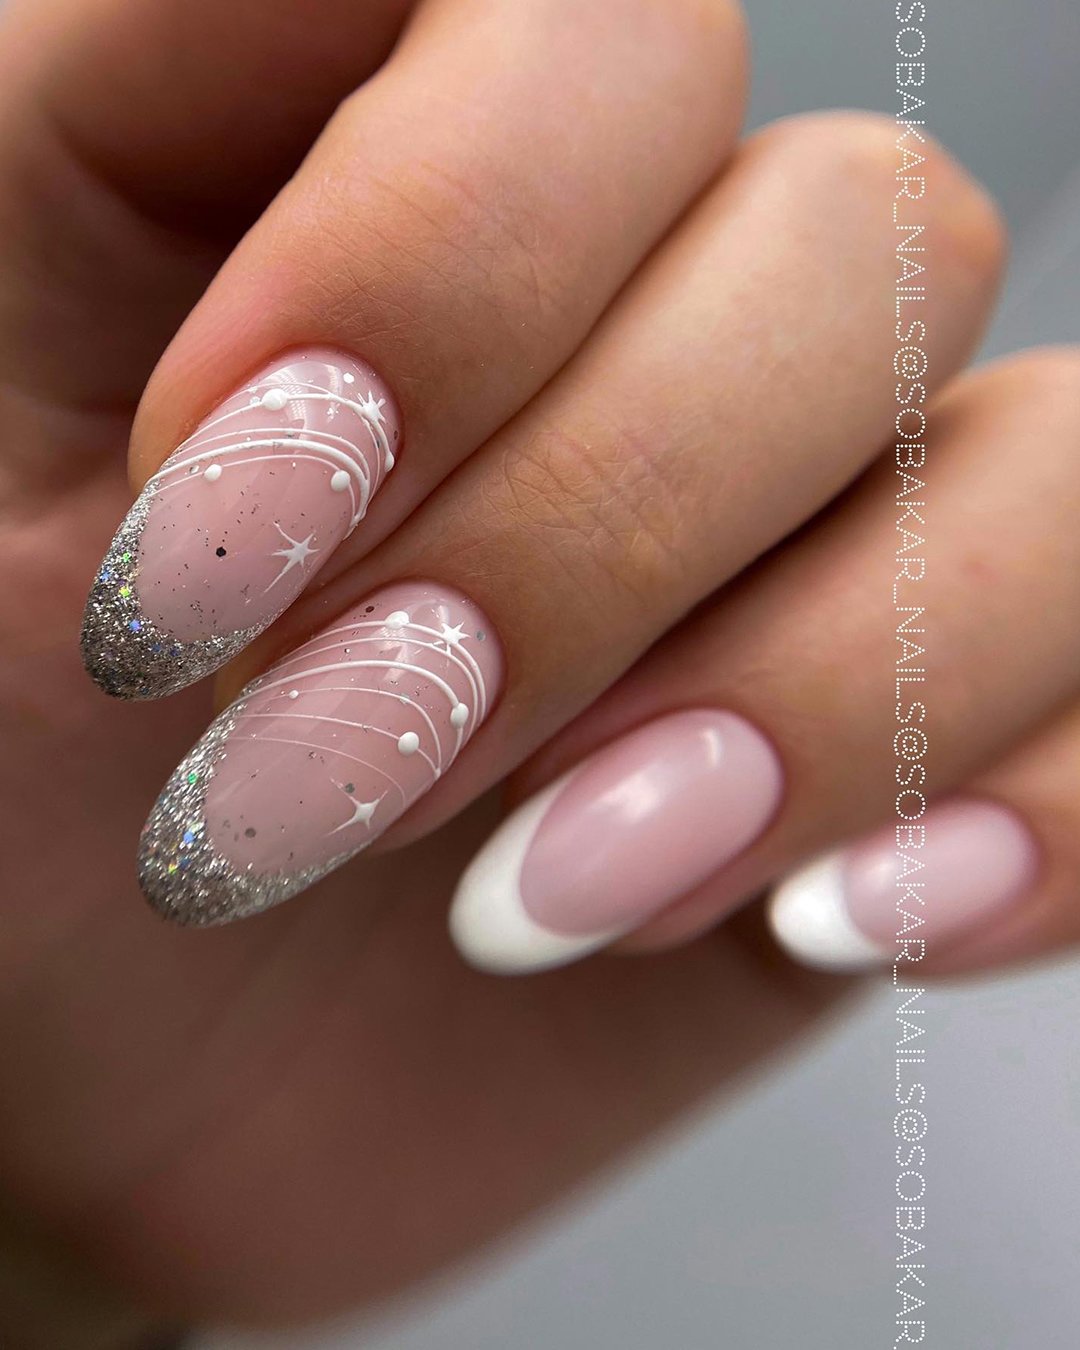 pink and white nails wedding with stripes and gloss french design sobakar_nails